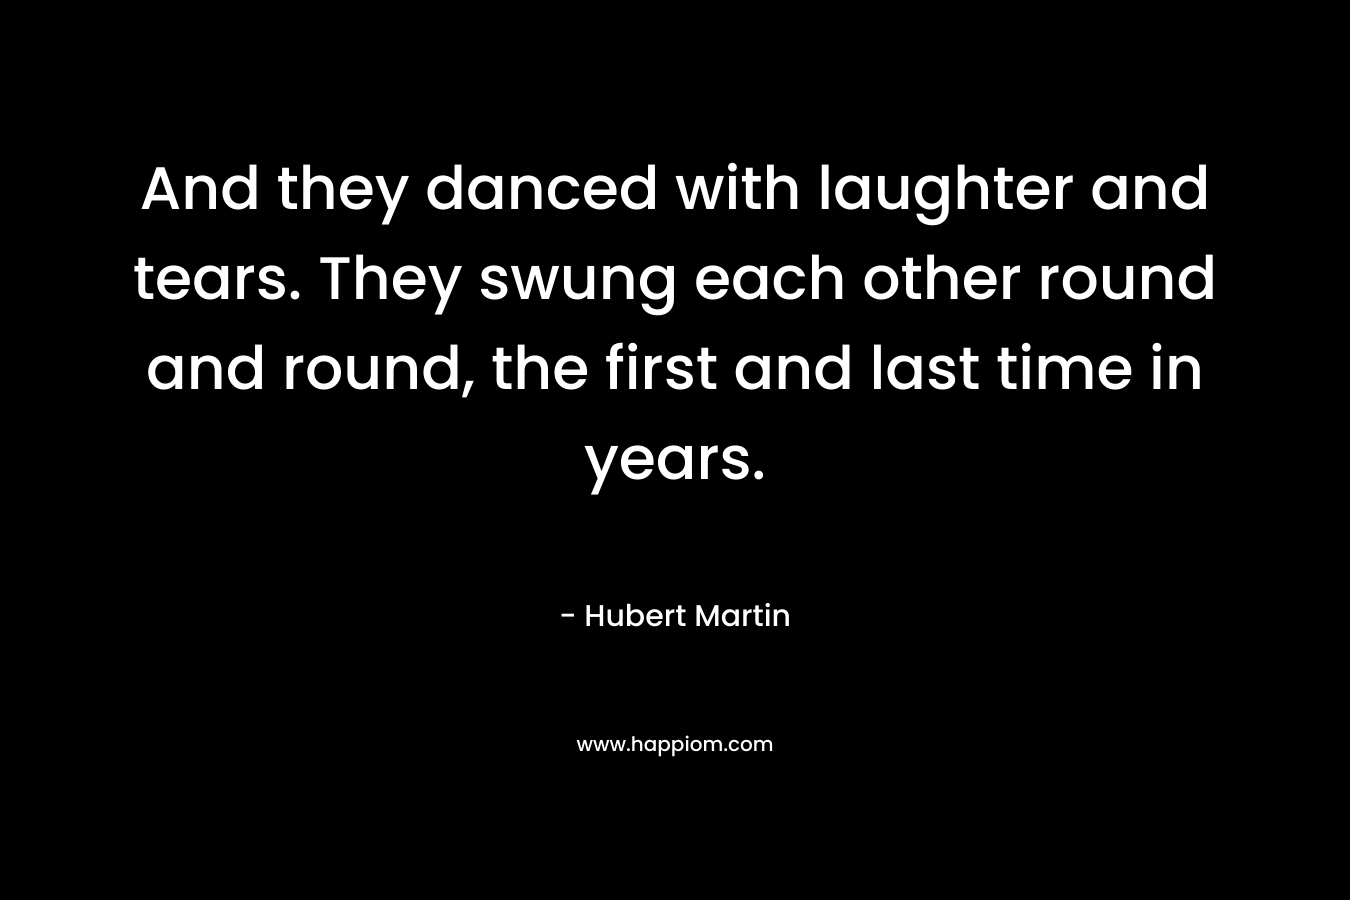 And they danced with laughter and tears. They swung each other round and round, the first and last time in years. – Hubert Martin